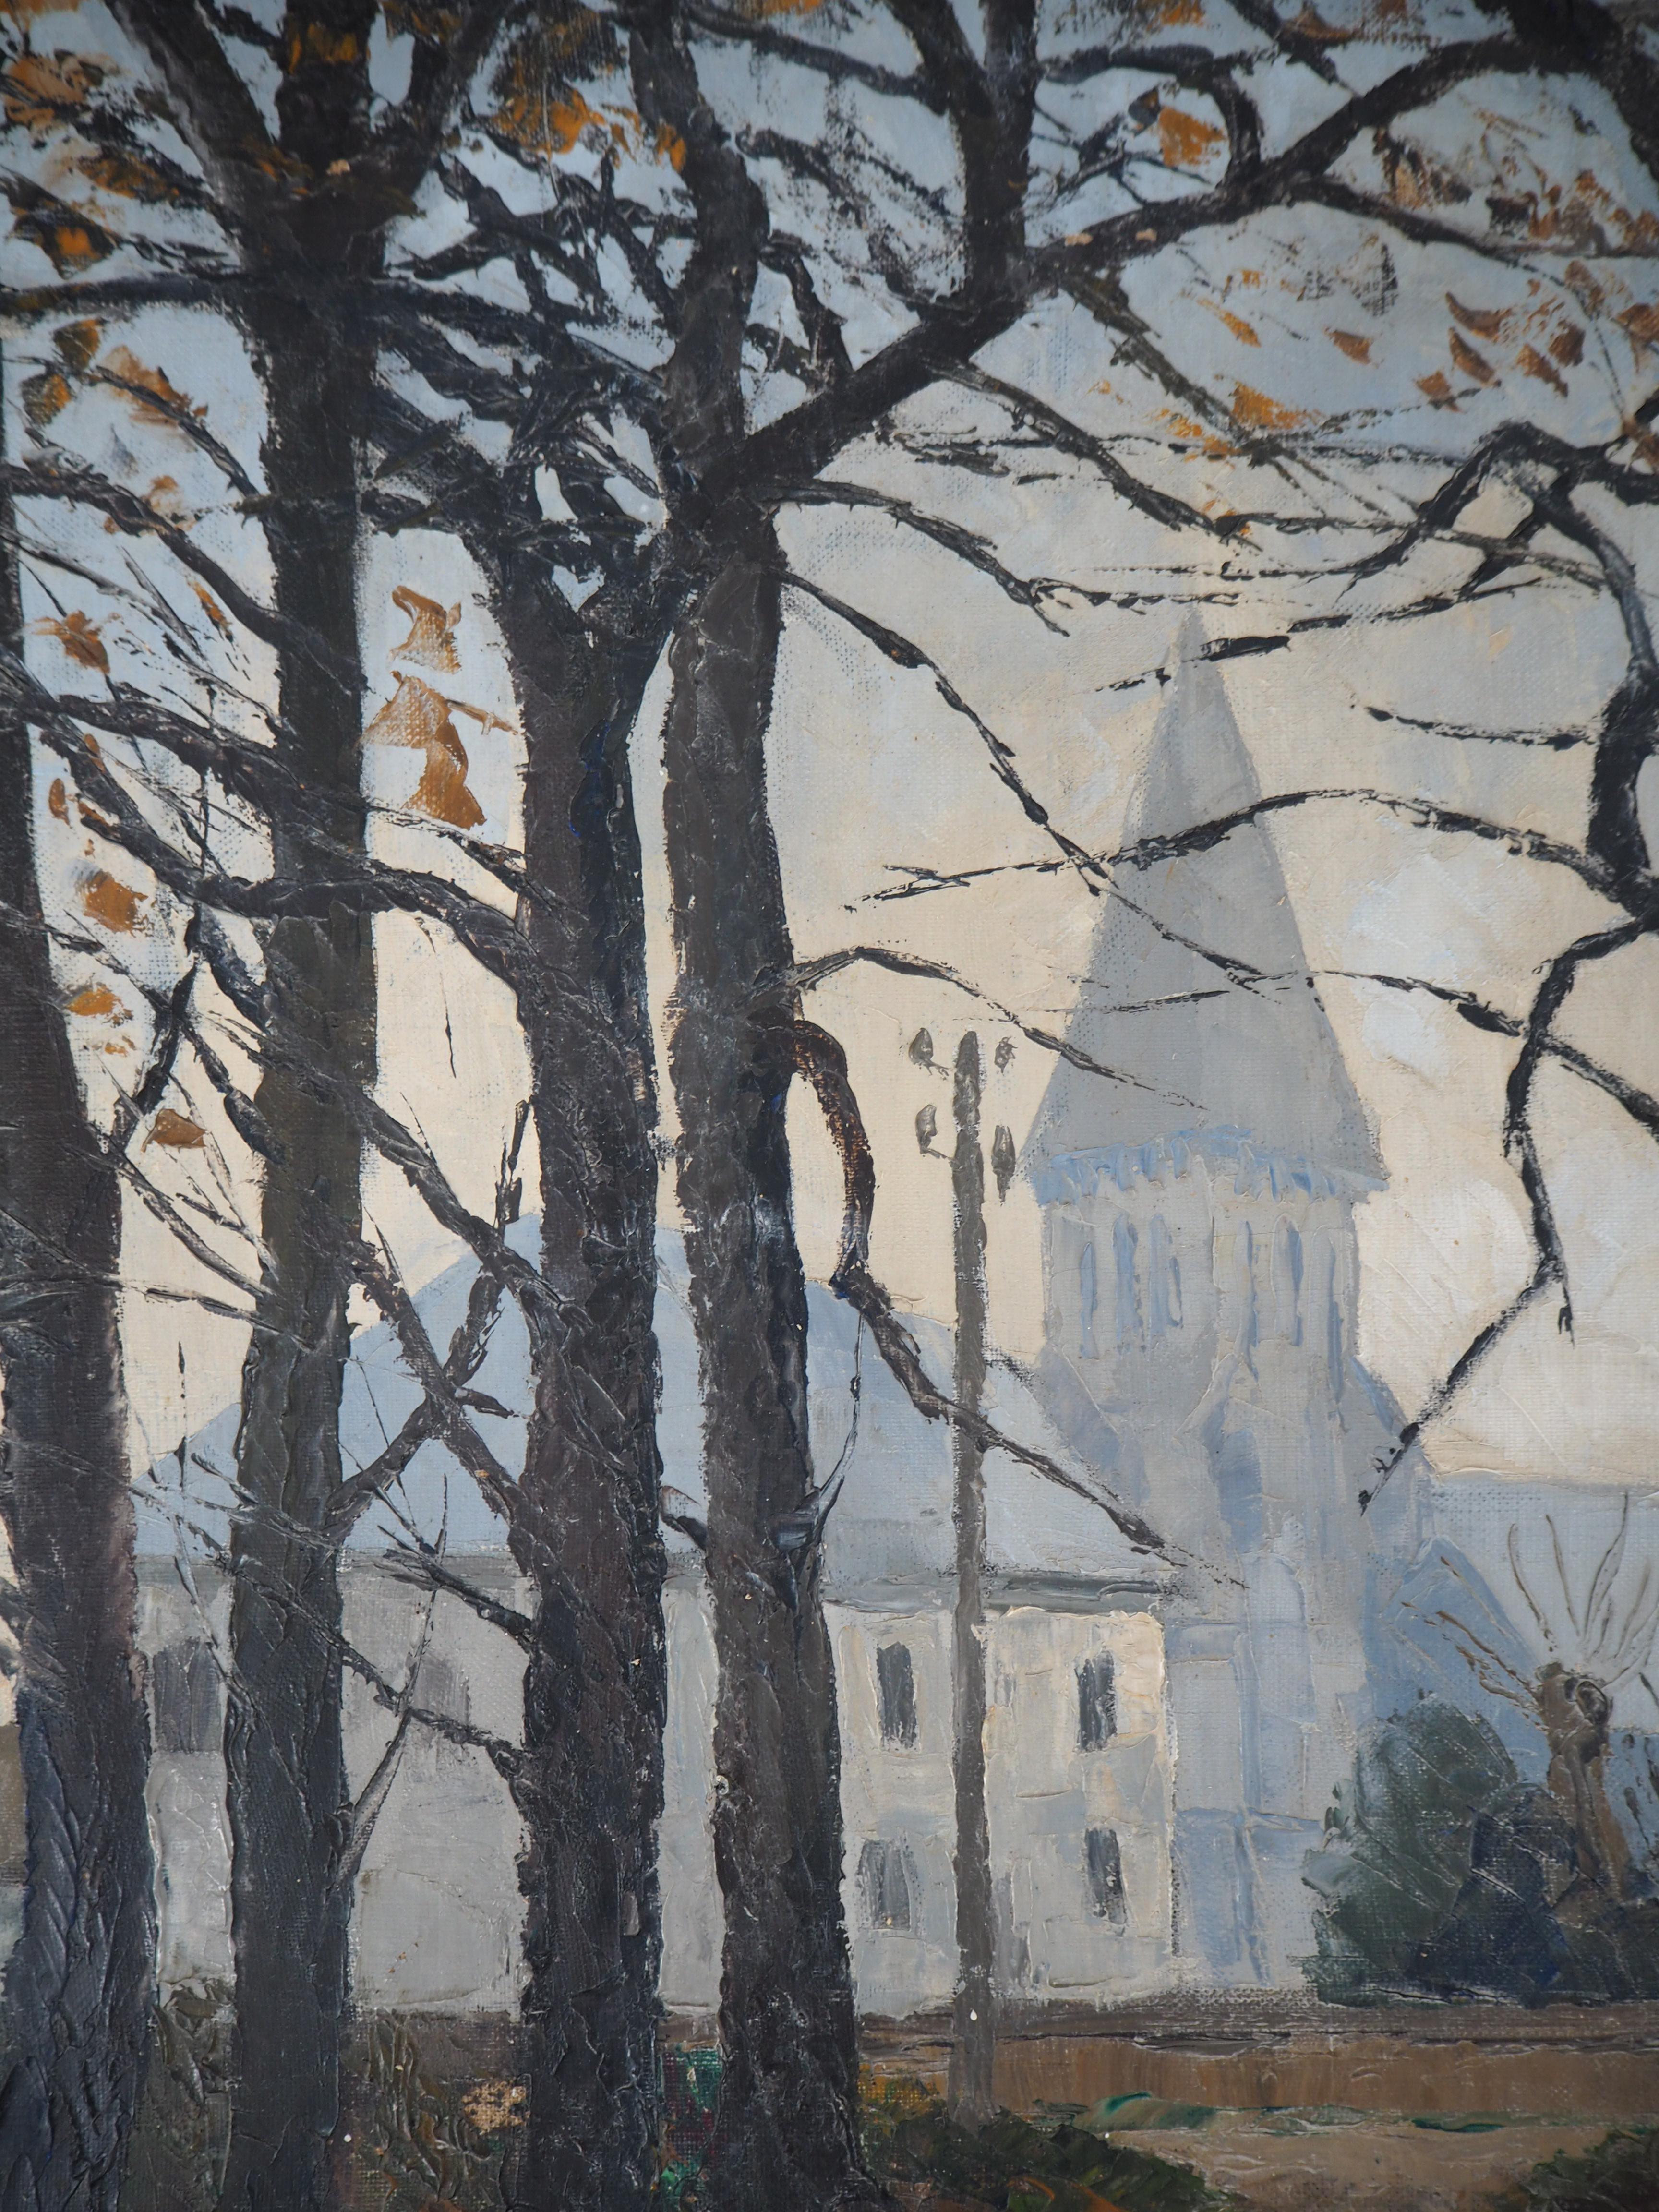 Normandy : Church of St Denis - Original oil on canvas, Handsigned 2